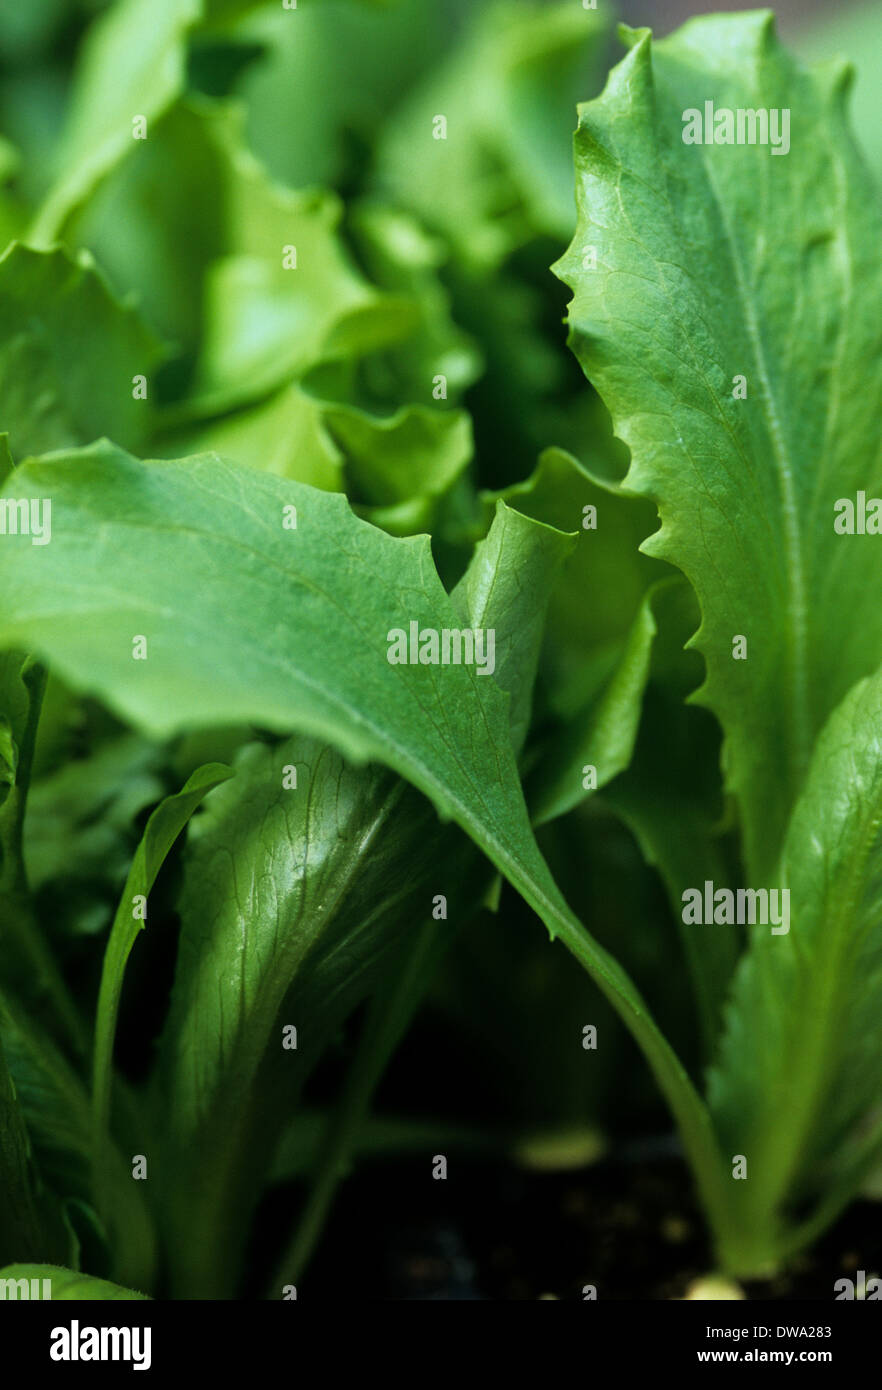 Editorial image of young leaves of Webbs Lettuce Stock Photo